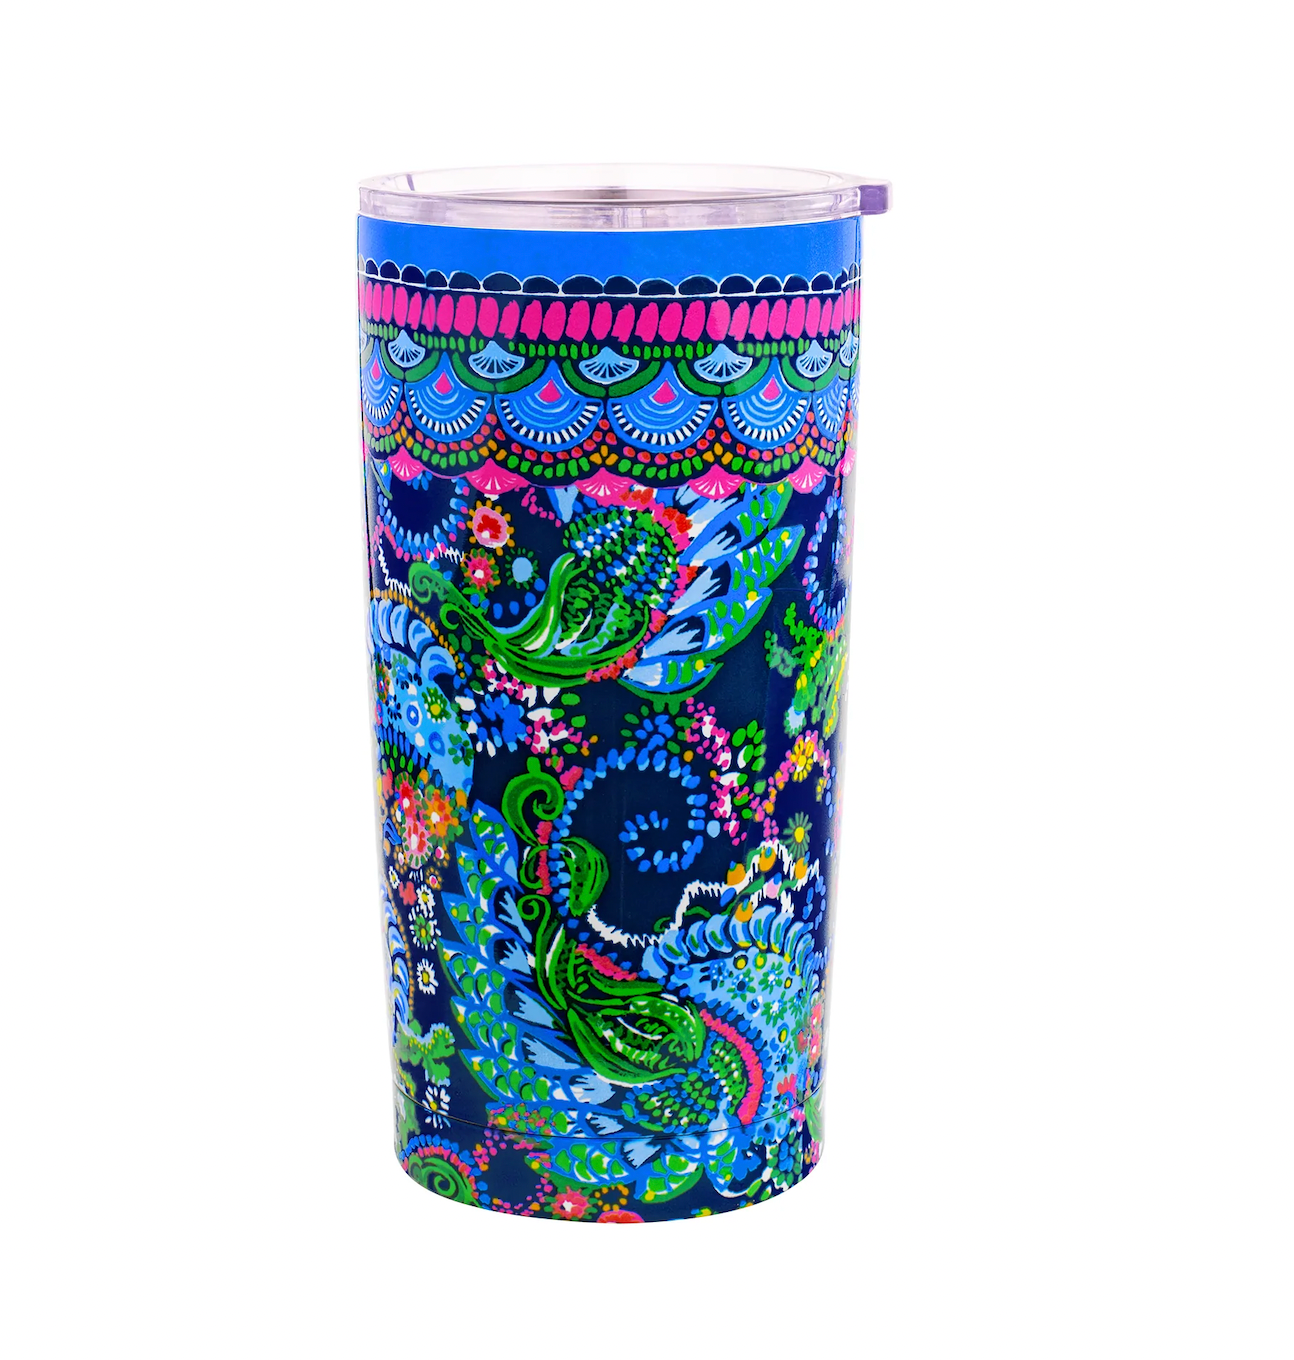 Lilly Pulitzer Stainless Steel Tumbler - Take Me To The Sea